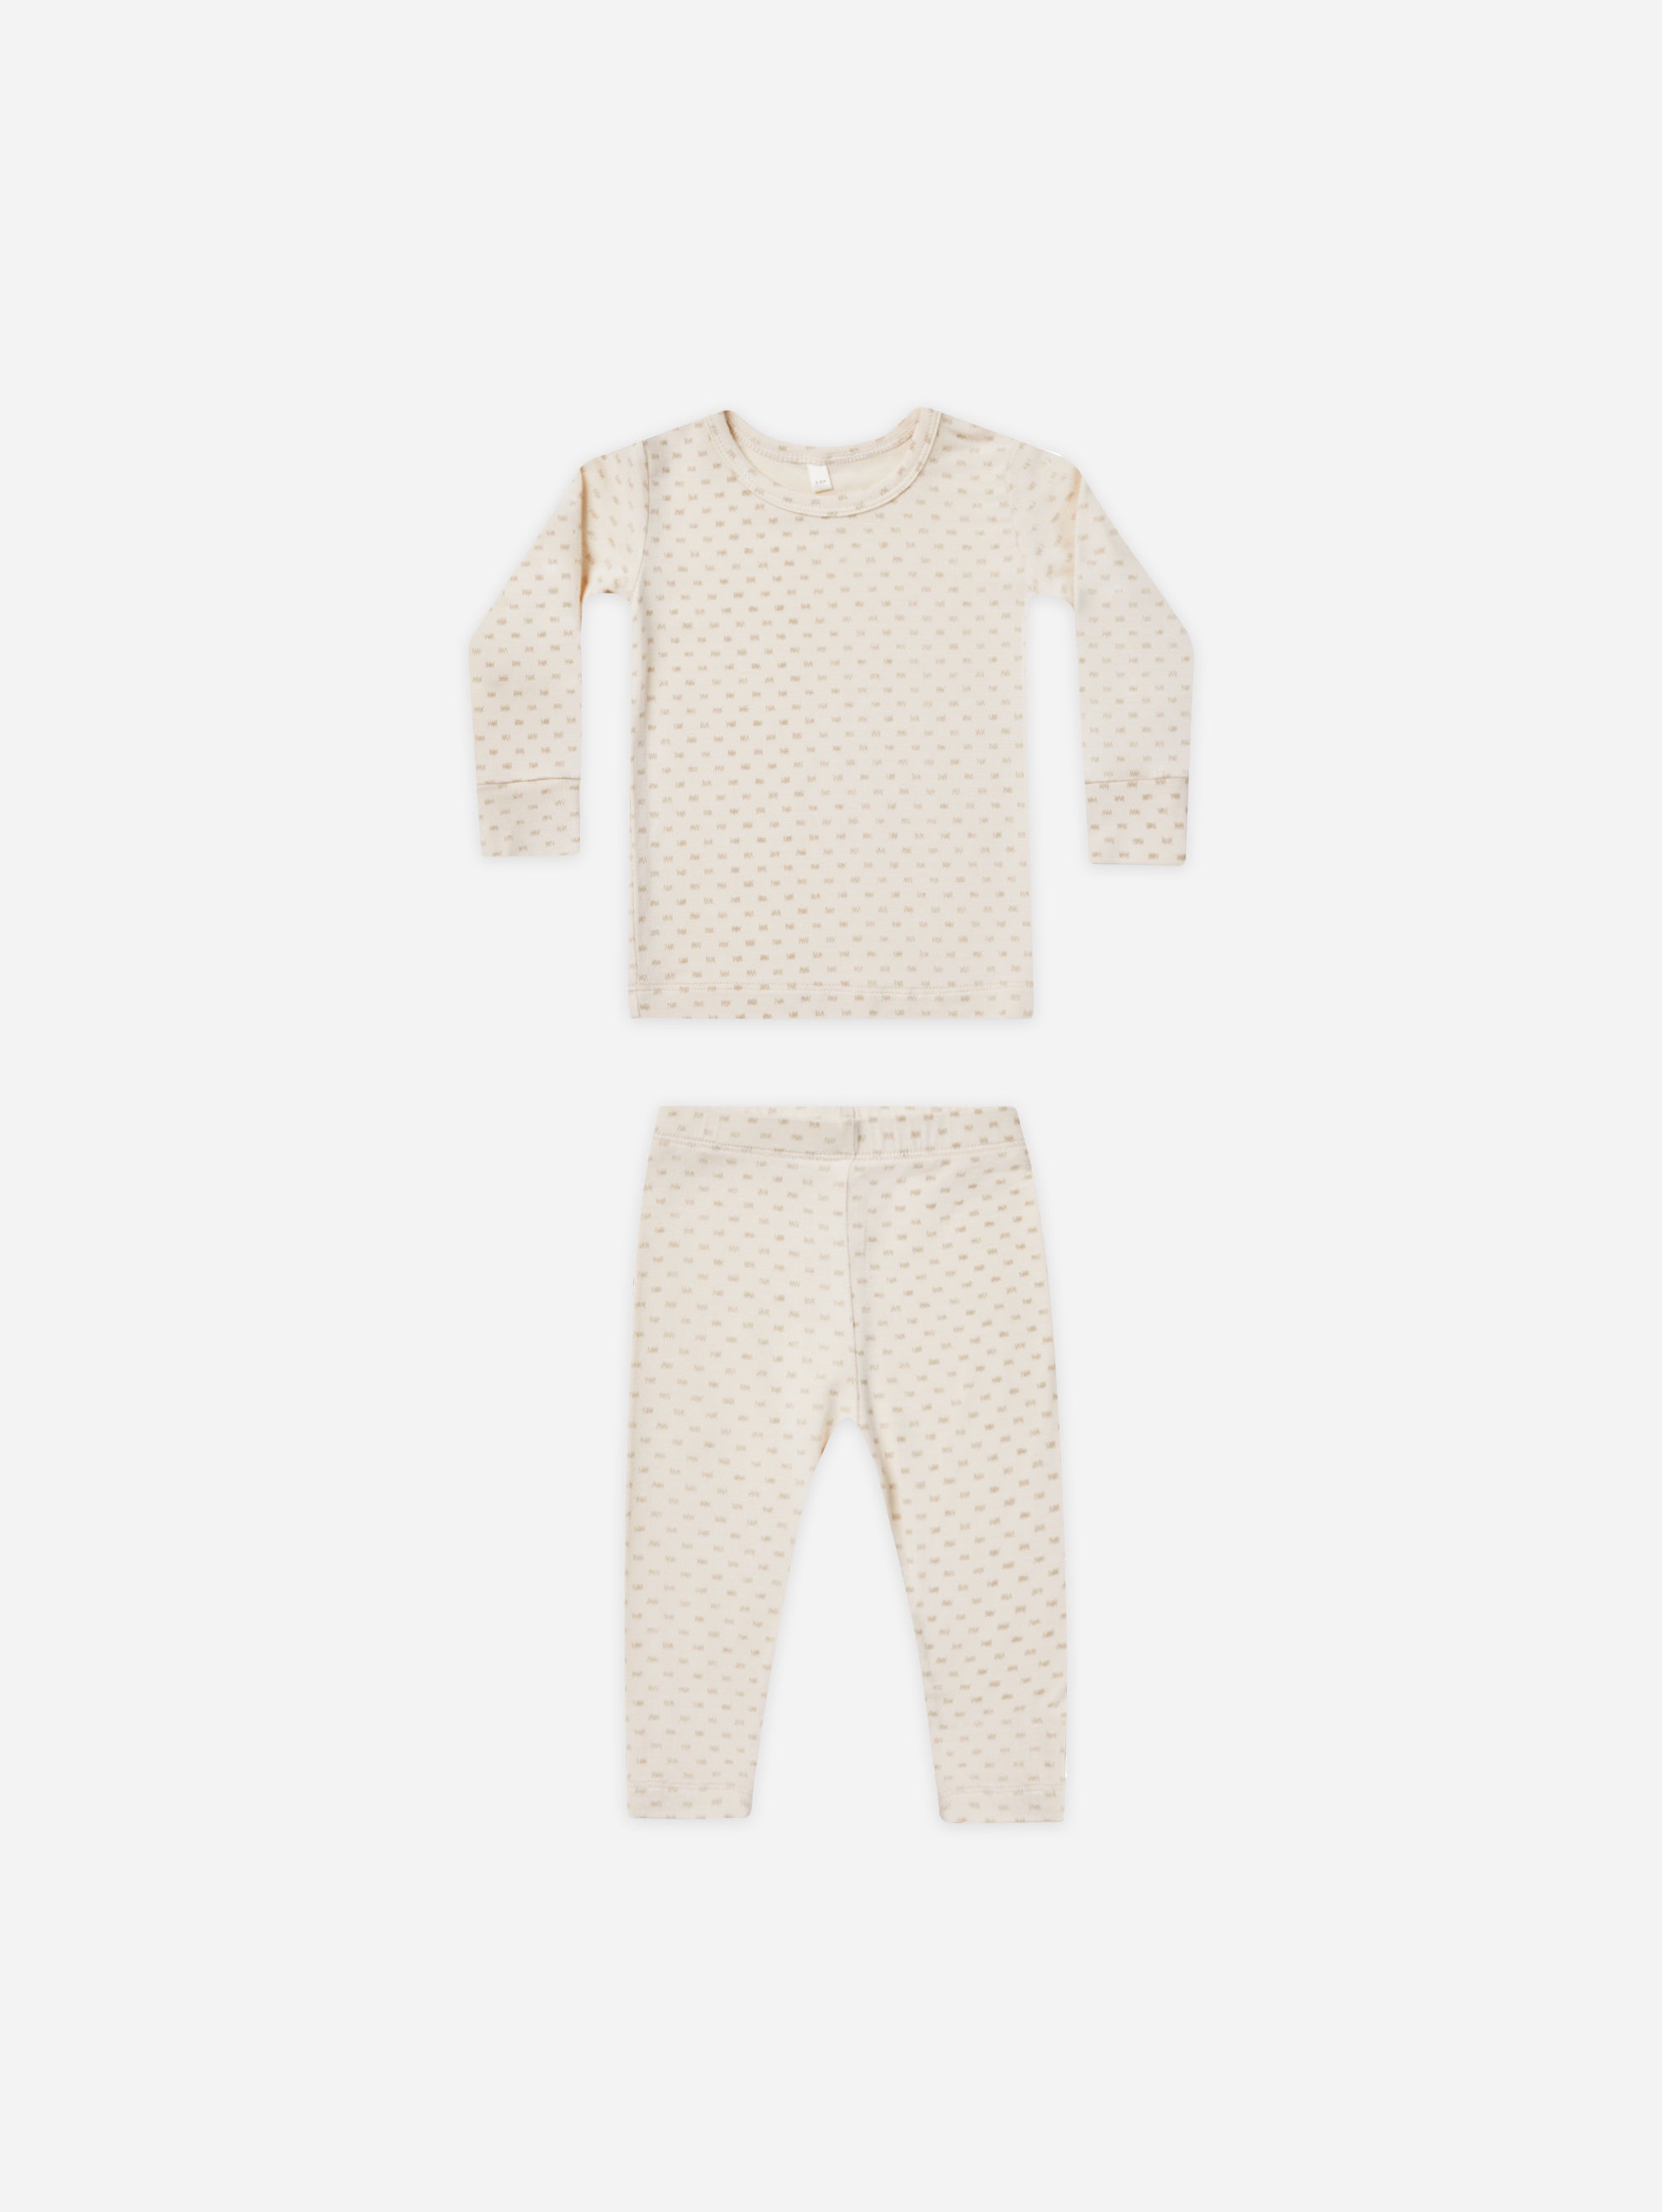 Bamboo Pajama Set || Oat Check - Rylee + Cru | Kids Clothes | Trendy Baby Clothes | Modern Infant Outfits |